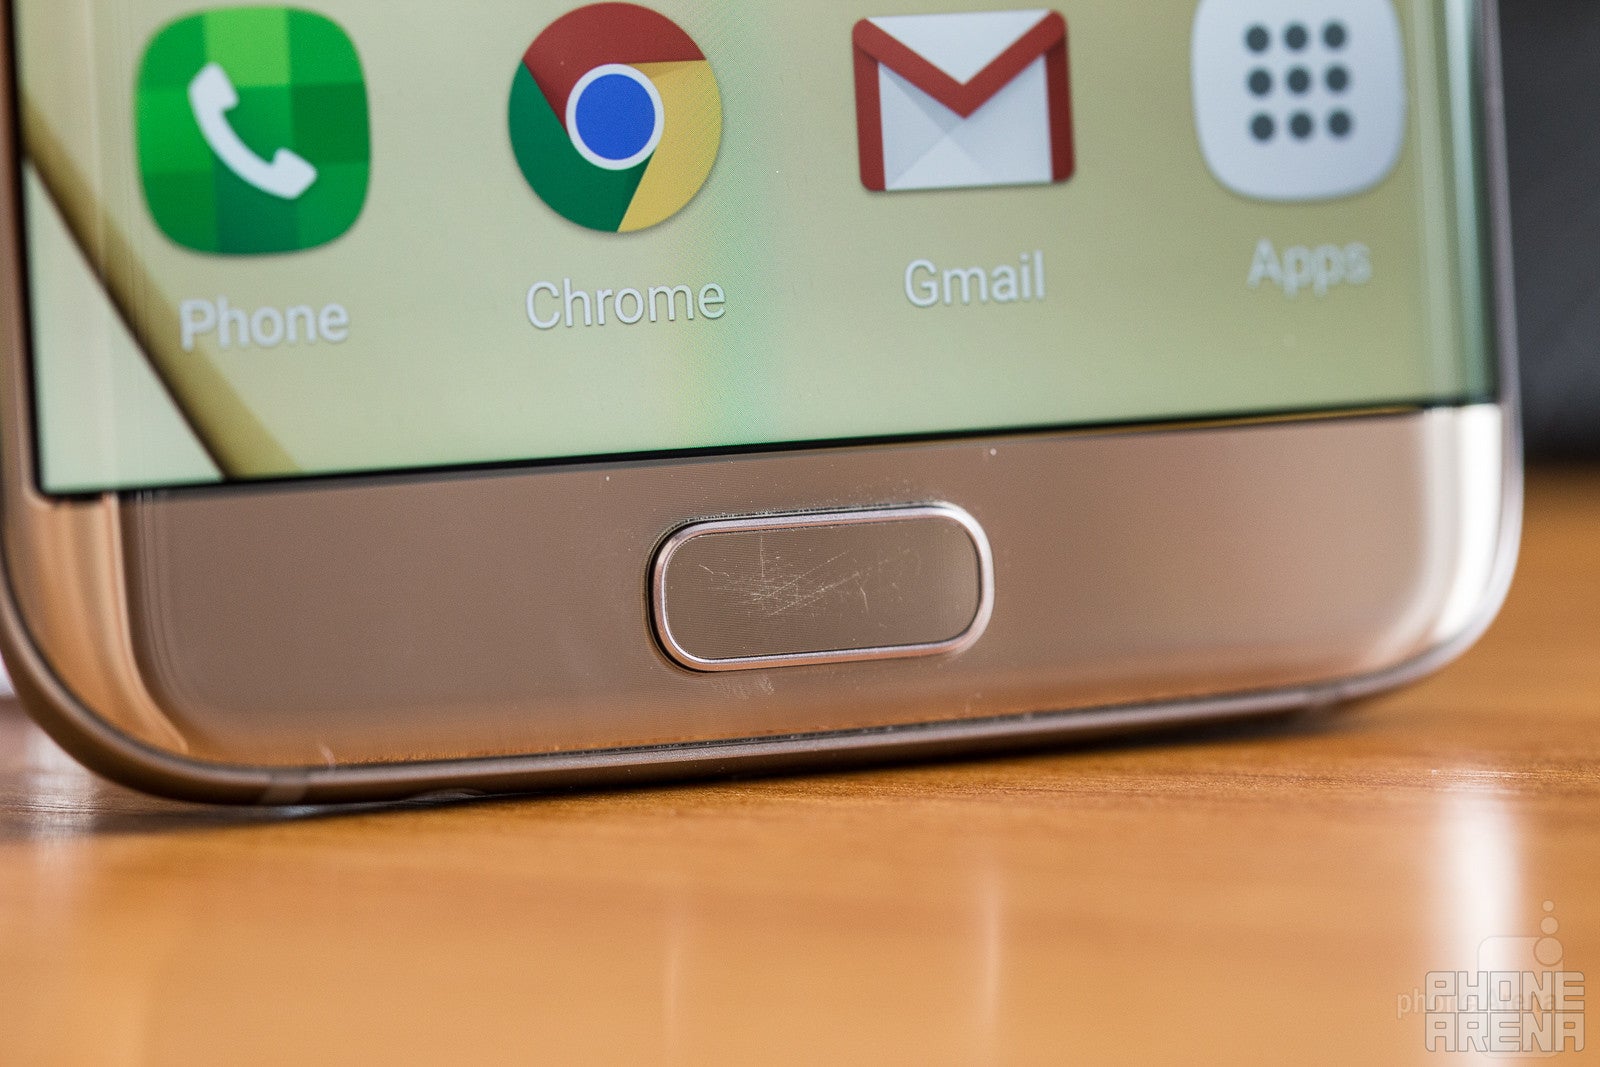 Does your&amp;nbsp;S7 / S7&amp;nbsp;edge&amp;nbsp;fingerprint sensor&amp;nbsp;look in a similar way? - Beware the scratch: Galaxy S7, S7 edge home buttons are super easy to damage